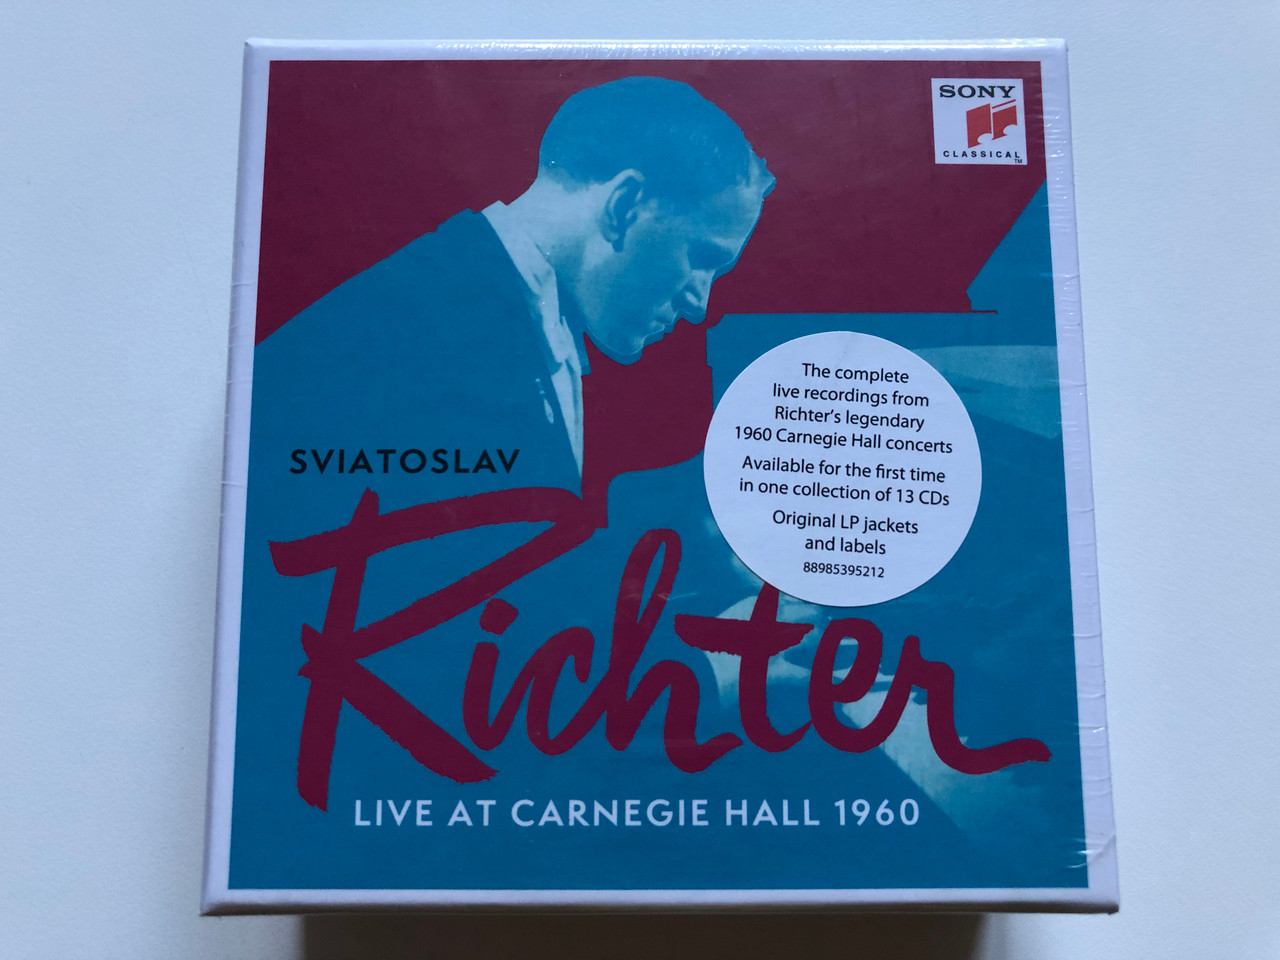 https://cdn10.bigcommerce.com/s-62bdpkt7pb/products/0/images/256175/Sviatoslav_Richter_Live_At_Carnegie_Hall_1960_The_complete_live_recordings_from_Richters_legendary_1960_Carnegie_Hall_concerts._Available_for_the_first_time_in_one_collection_of_13_CDs._1__93620.1665652877.1280.1280.JPG?c=2&_gl=1*1mjhw8l*_ga*MjA2NTIxMjE2MC4xNTkwNTEyNTMy*_ga_WS2VZYPC6G*MTY2NTY0ODE2NC41OTEuMS4xNjY1NjUyNjY0LjU2LjAuMA..